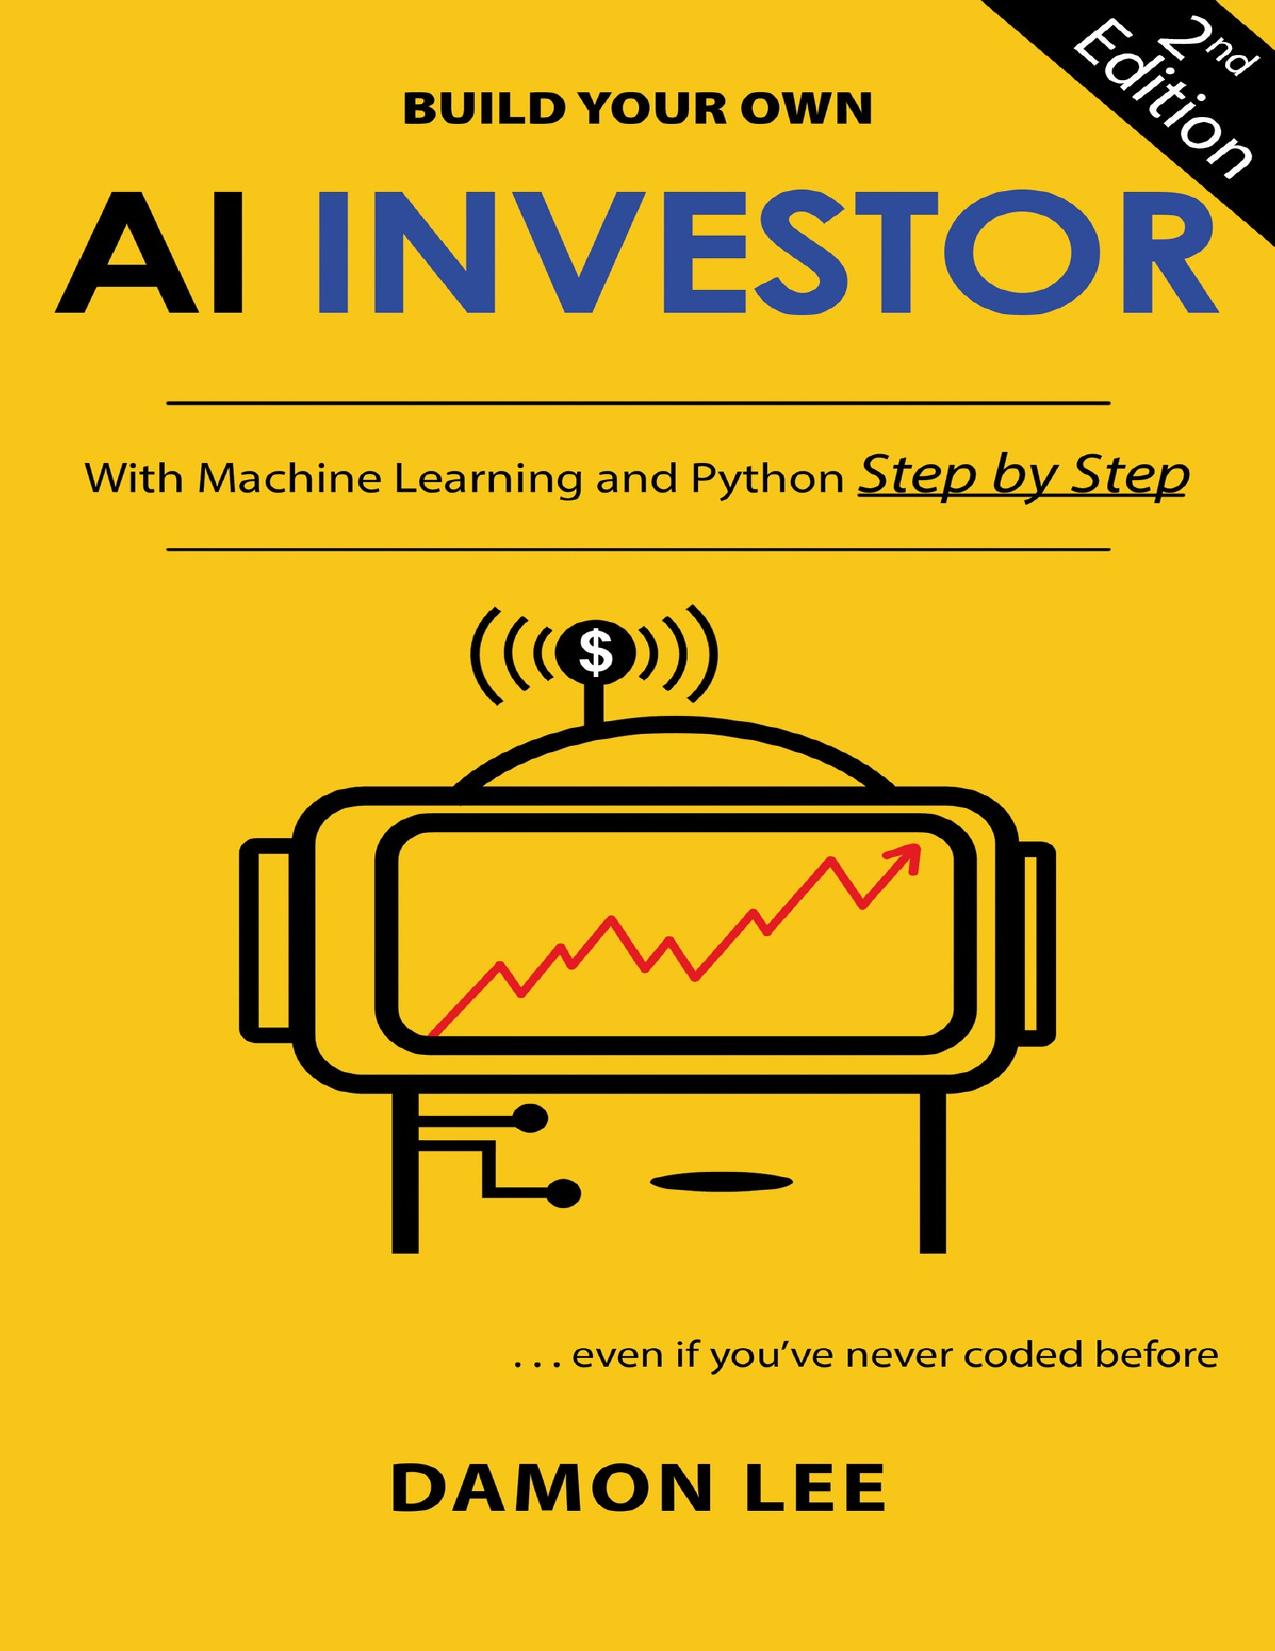 Build Your Own AI Investor: with Machine Learning and Python, Step by Step, Second Edition